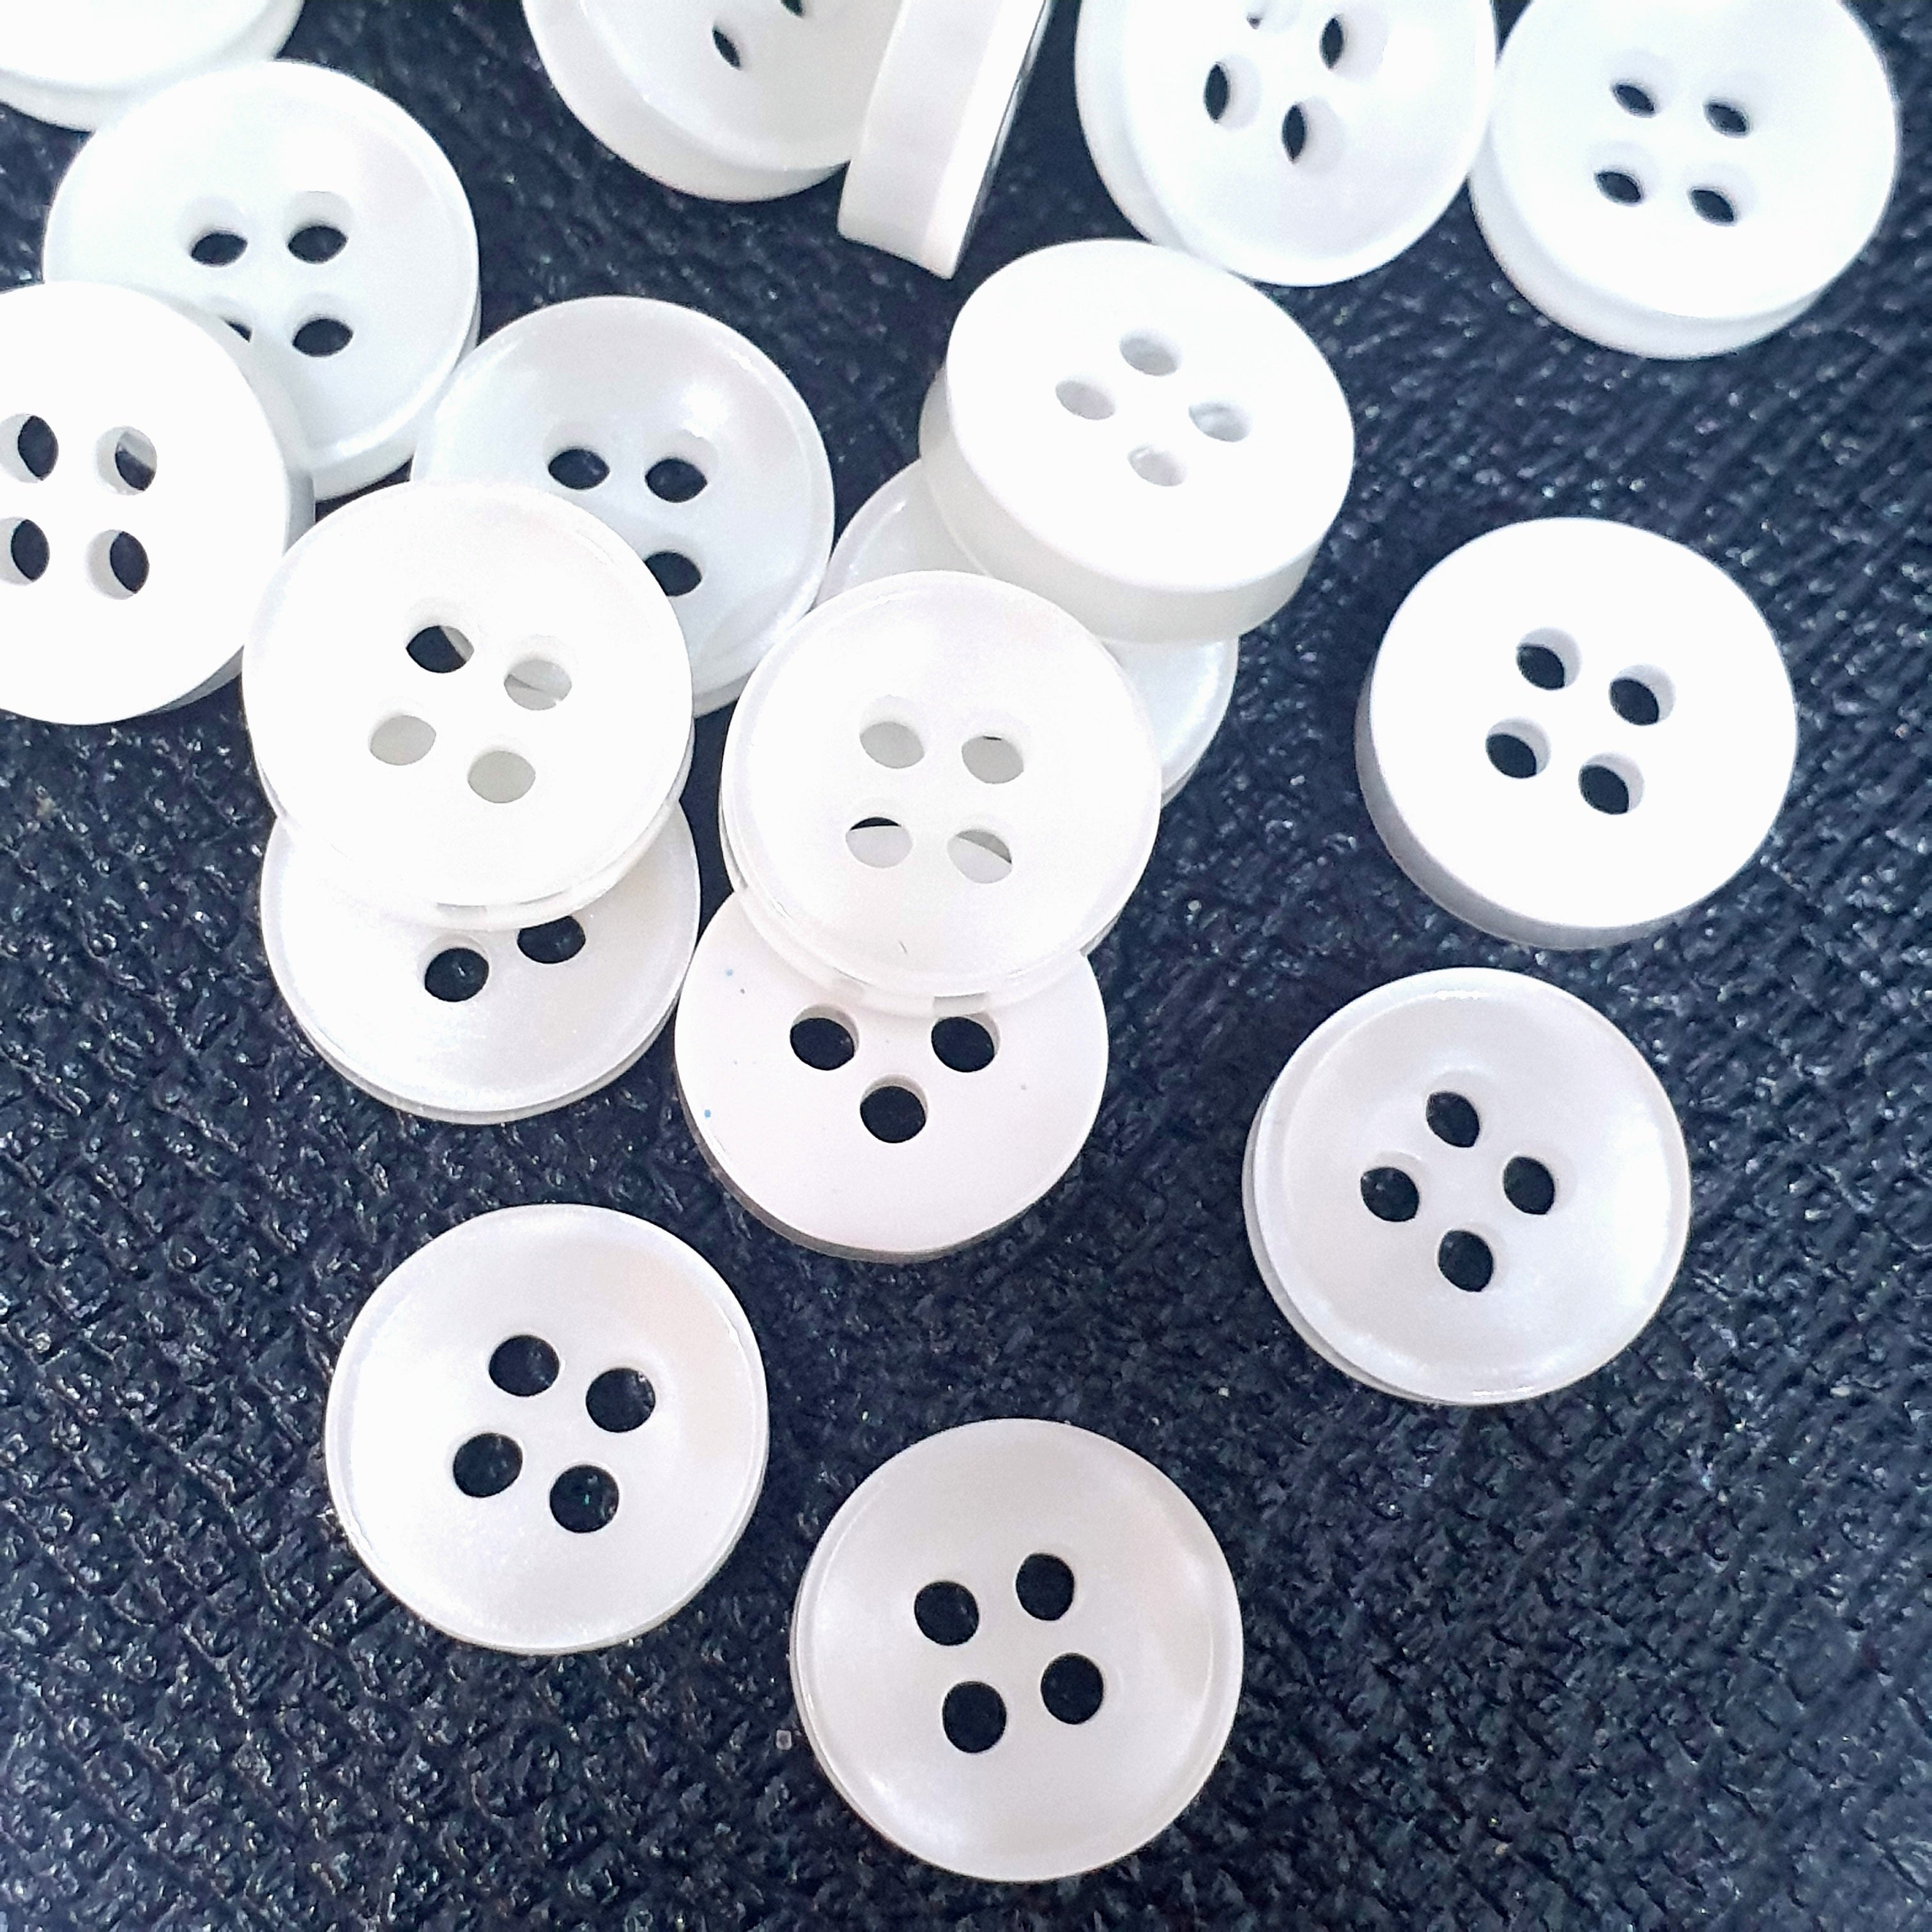 MajorCrafts 80pcs 11.5mm White Pearlescent 4 Holes High-Grade Round Resin Small Sewing Buttons